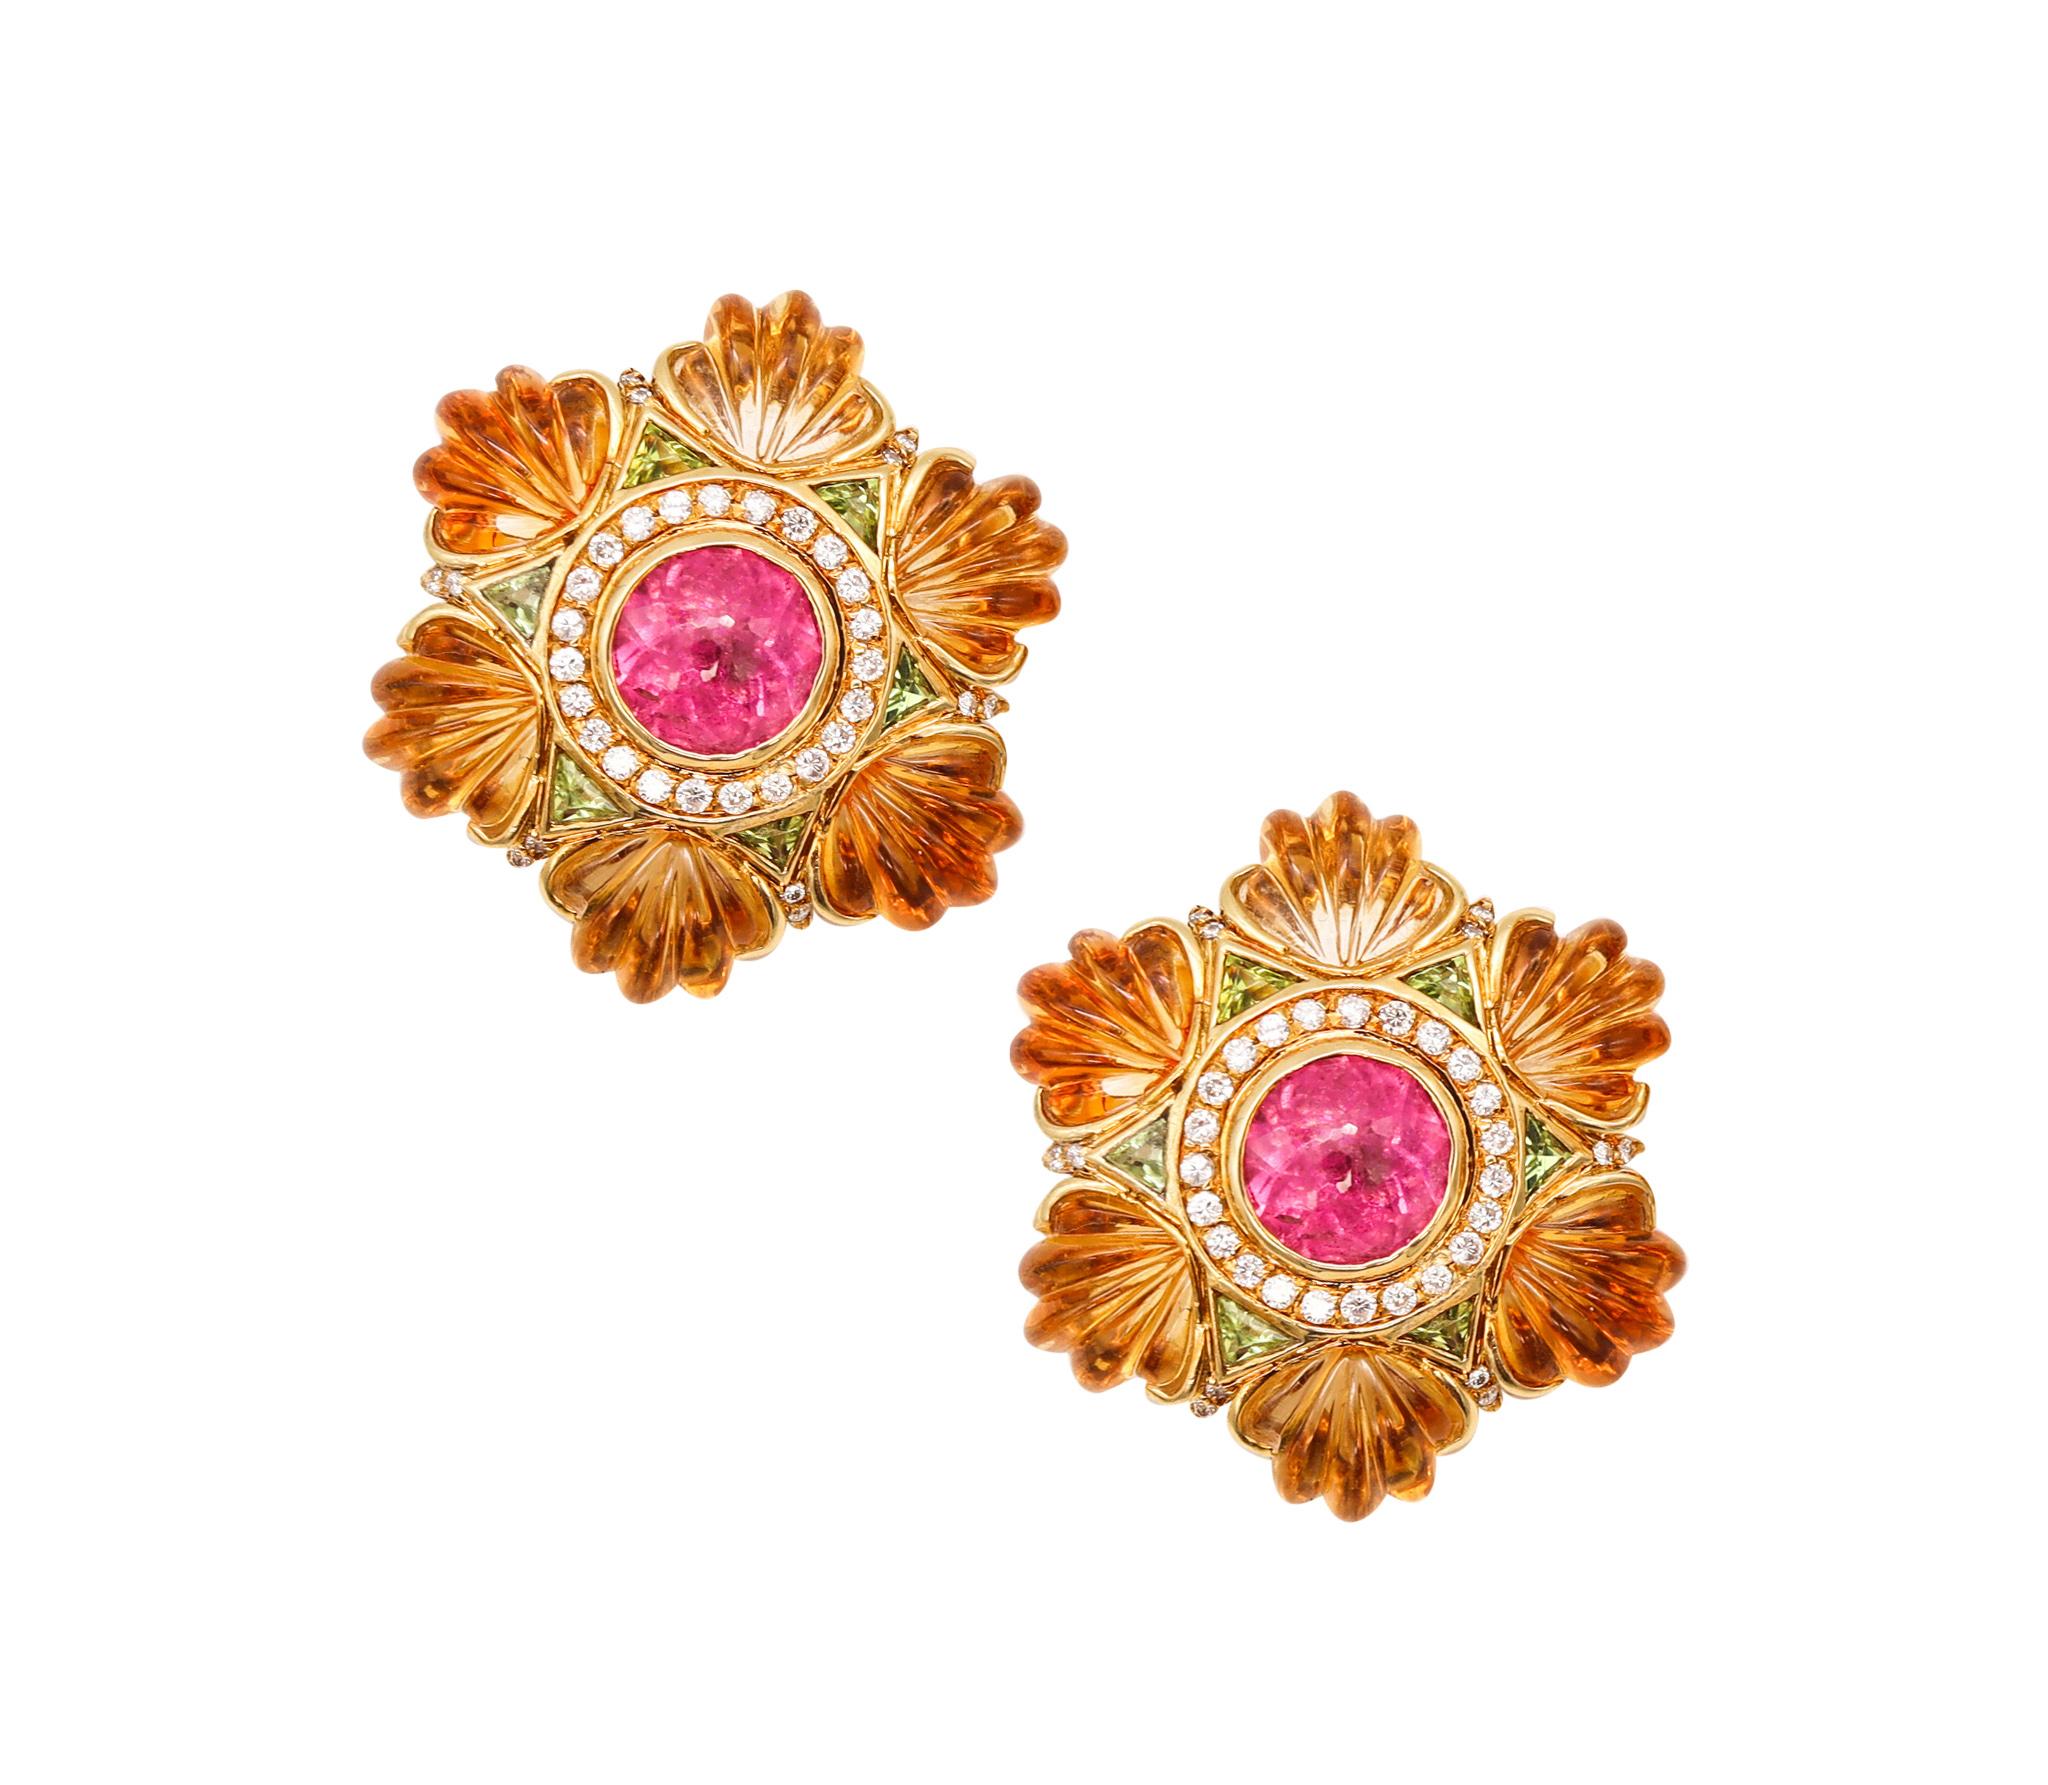 Beautiful pair of earrings designed by Roberto Legnazzi.

Colorful and elegant vintage pair of gem set clusters earrings, designed in Valenza, Italy by the jewelry Atelier of Roberto Legnazzi. They was carefully crafted in solid yellow gold of 18